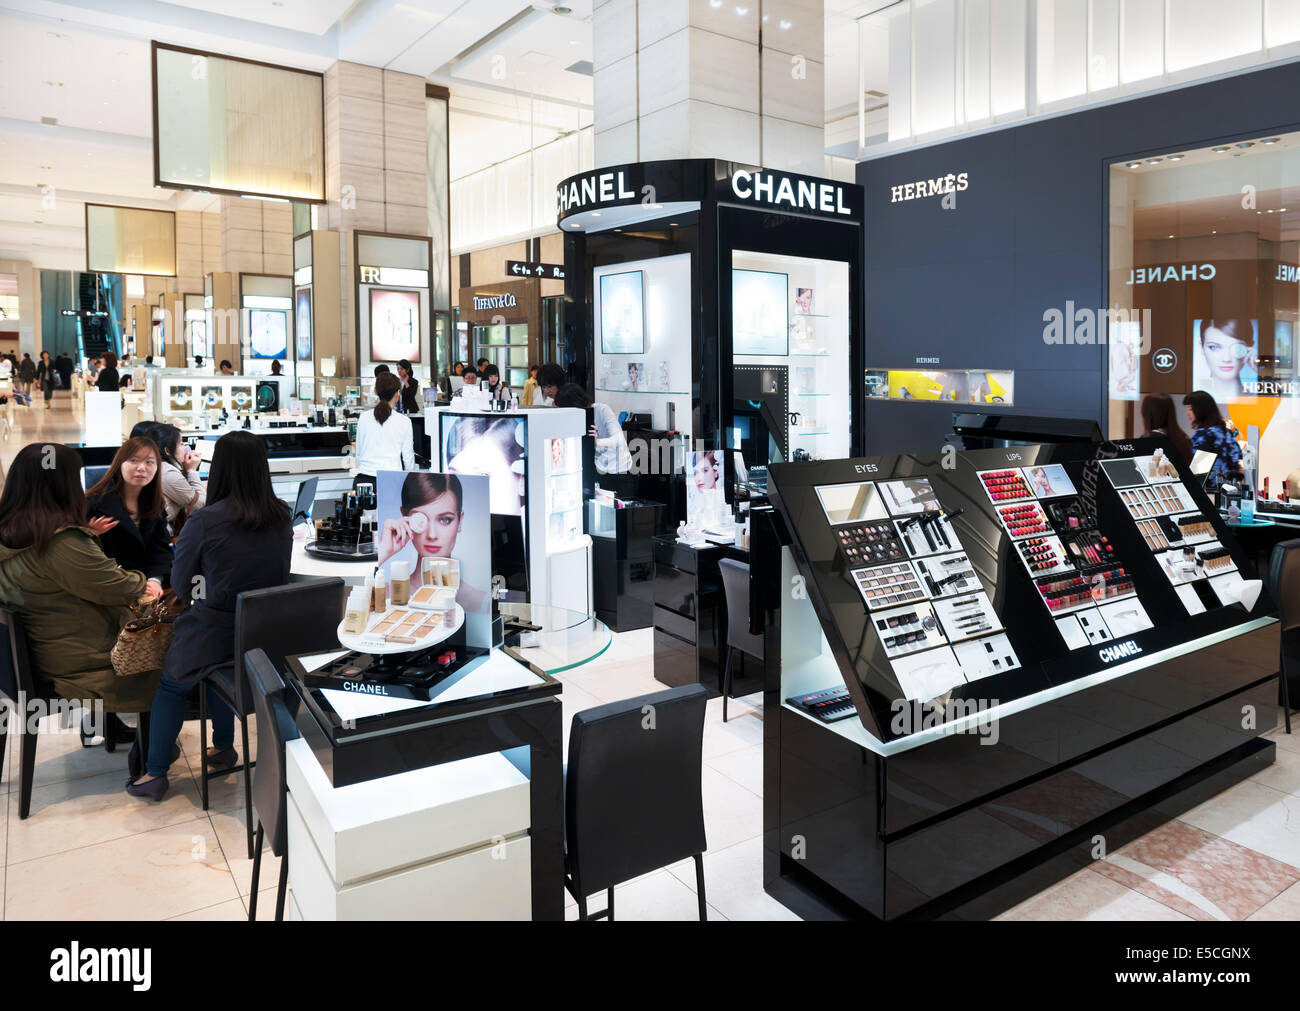 Chanel makeup store display in Tokyo, Japan Stock Photo - Alamy